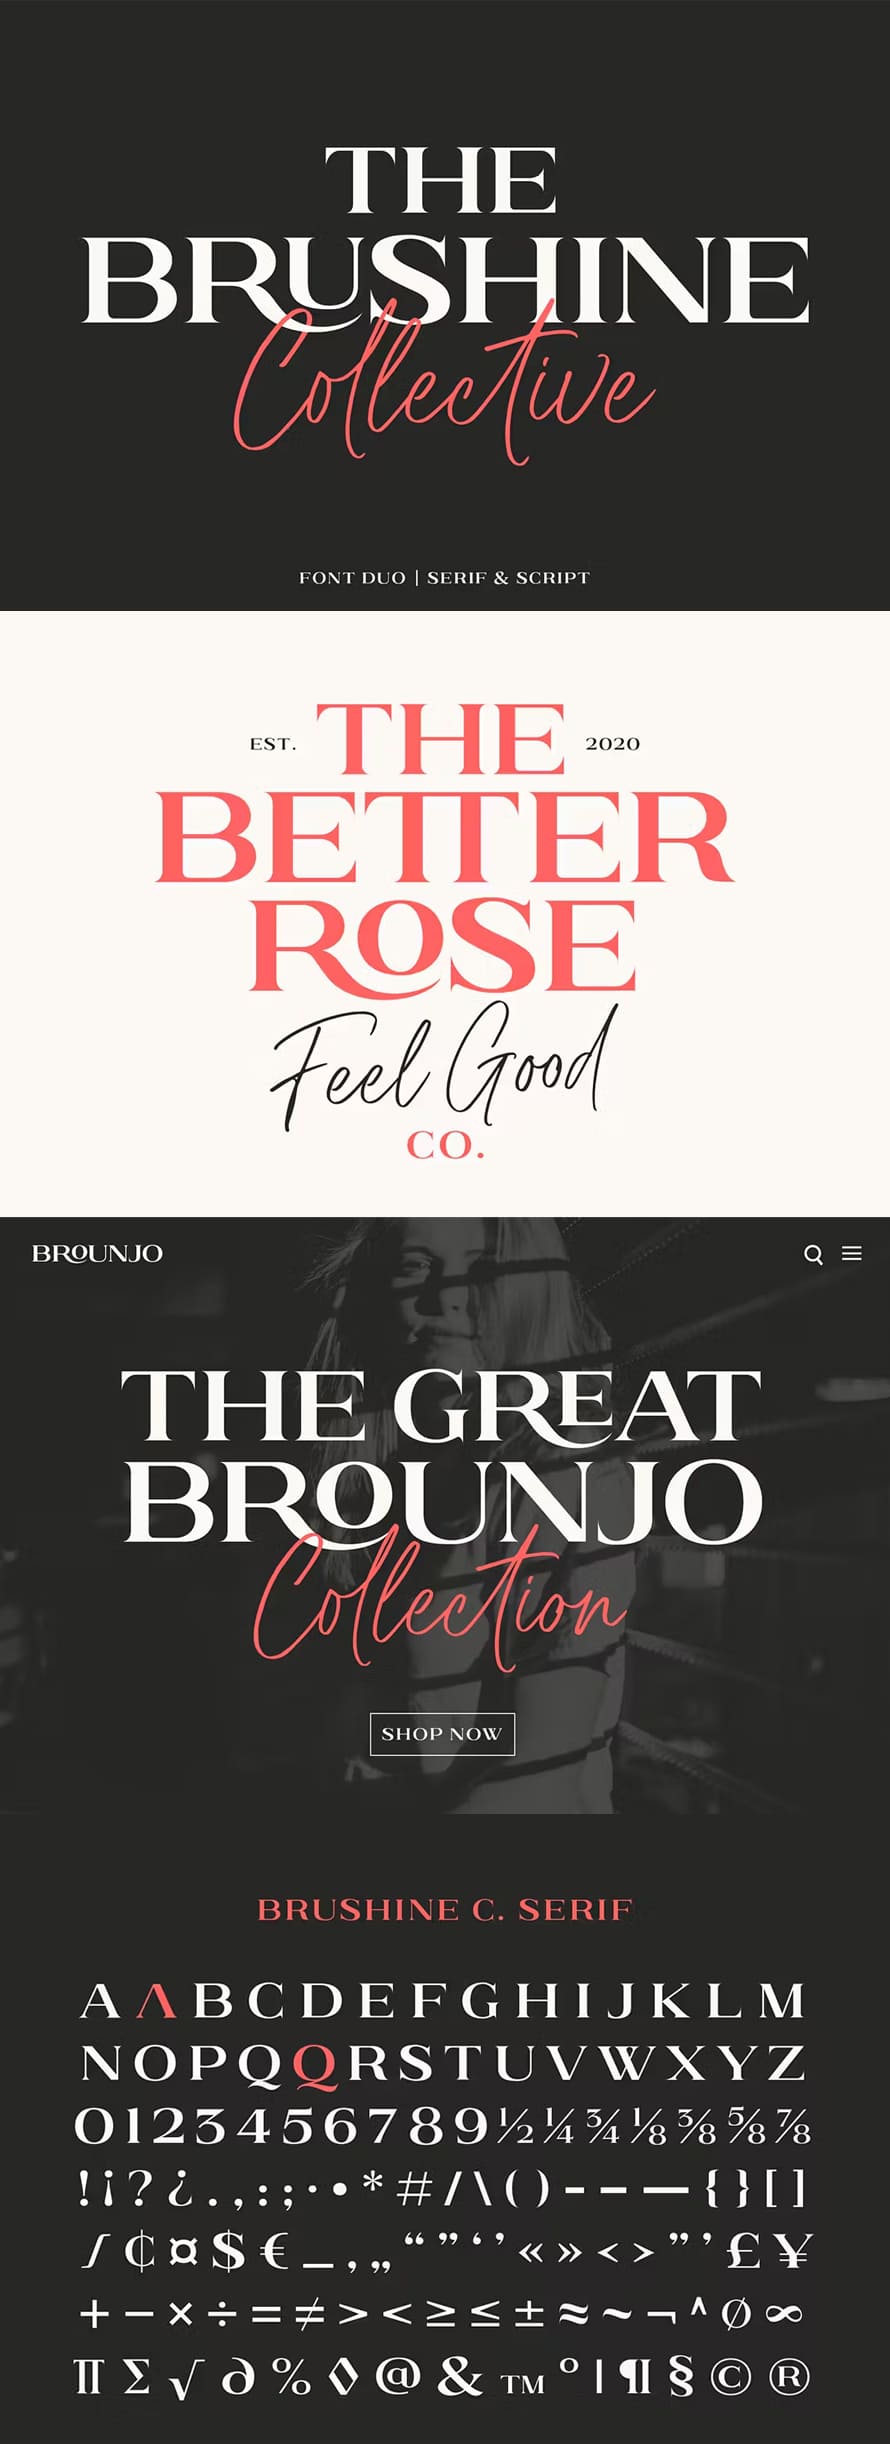 Brushine Collective Luxury Font For Logo